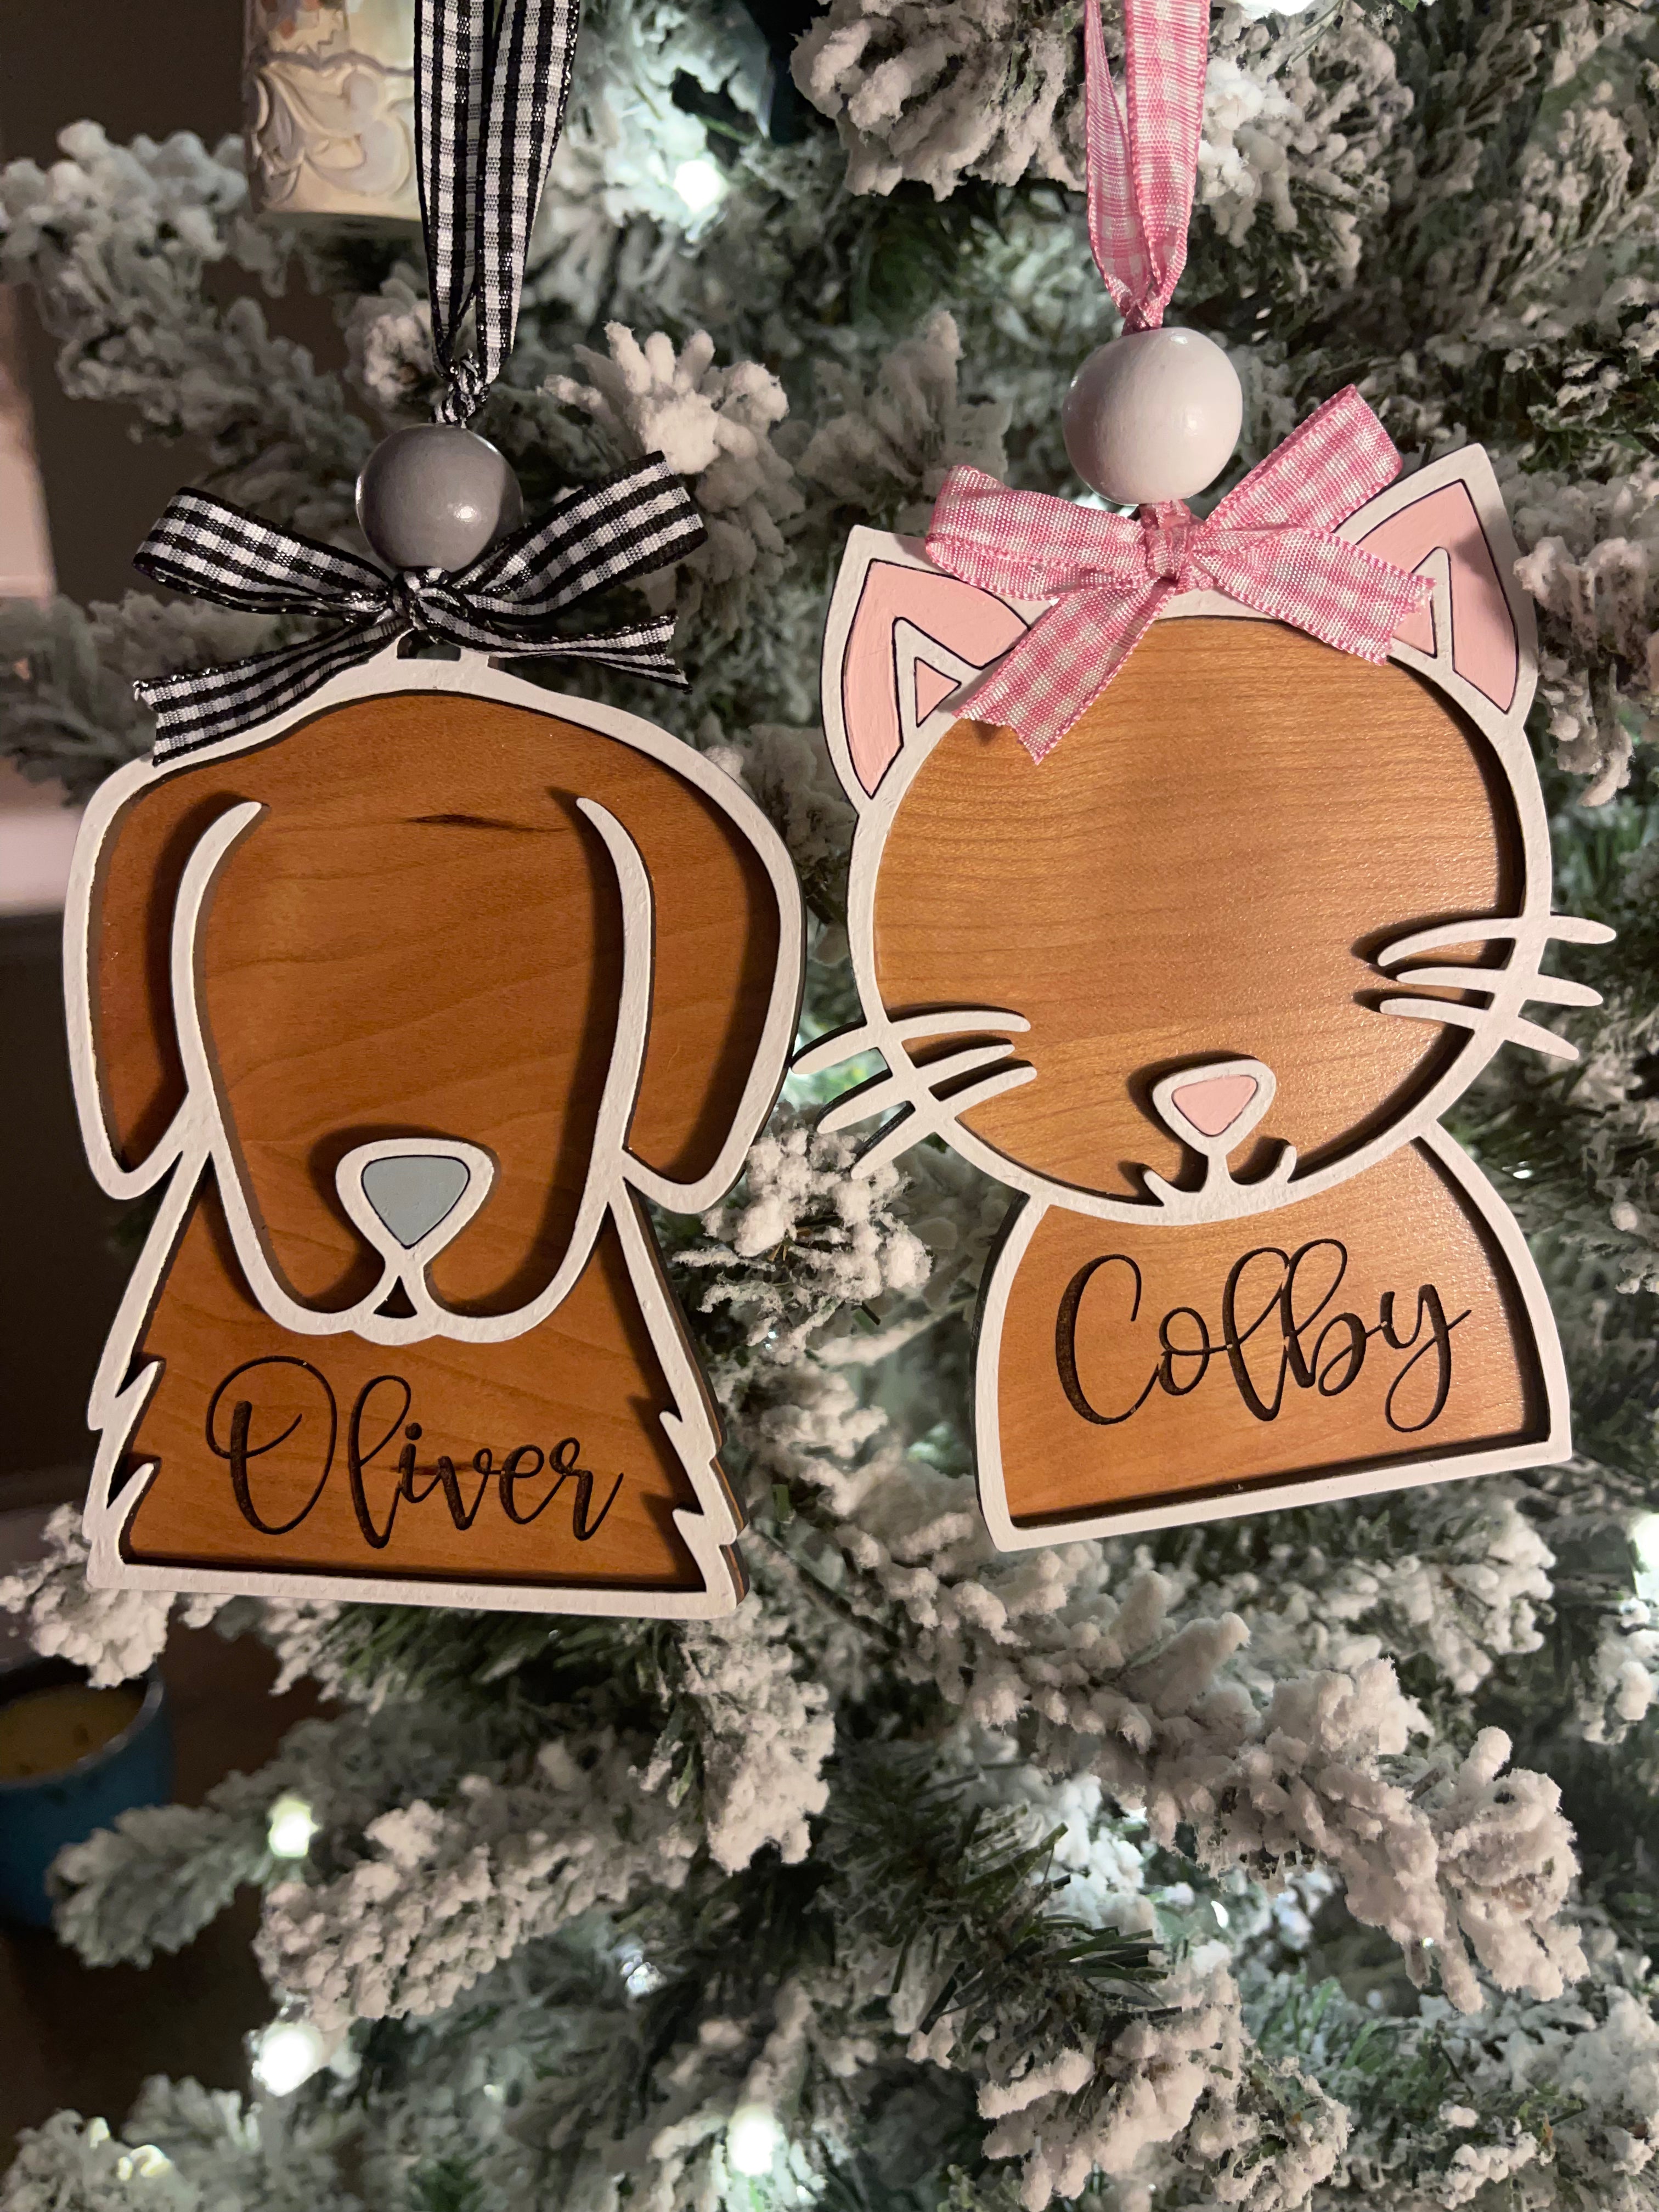 This is the dog and cat ornament side by side.